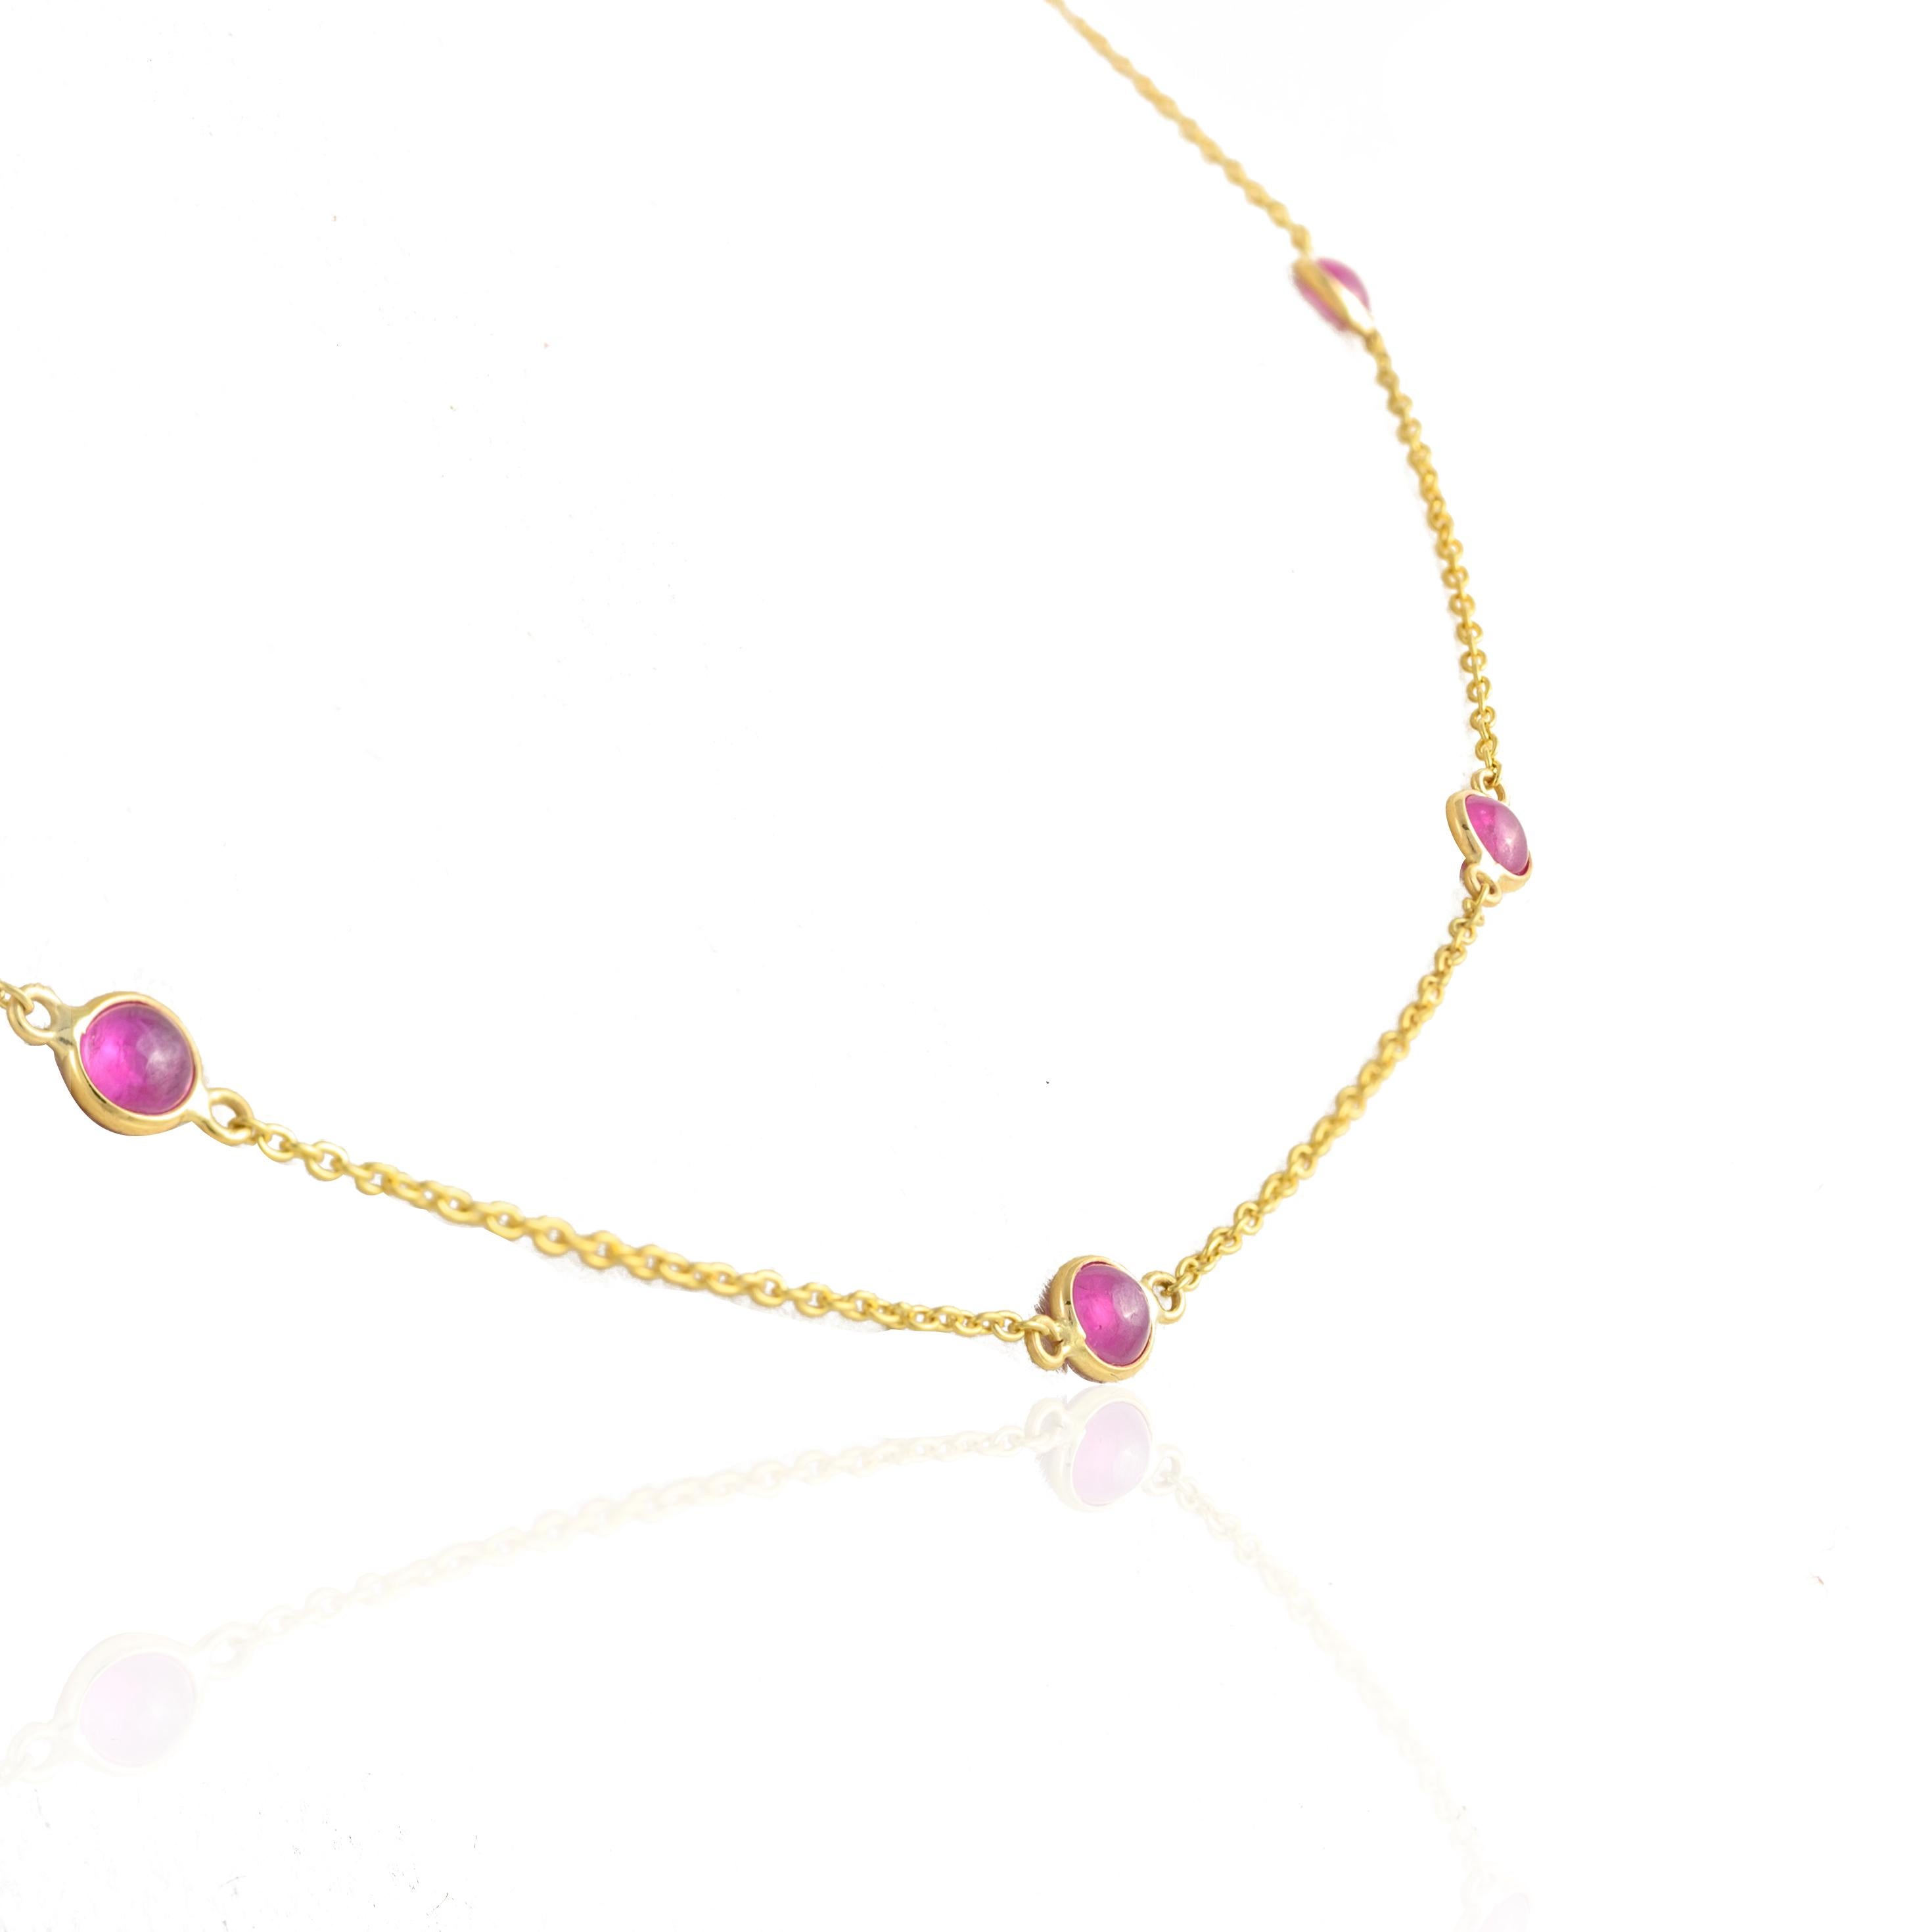 Round Cut Real Ruby Station Chain Necklace 14k Solid Yellow Gold, Christmas Gift For Her For Sale